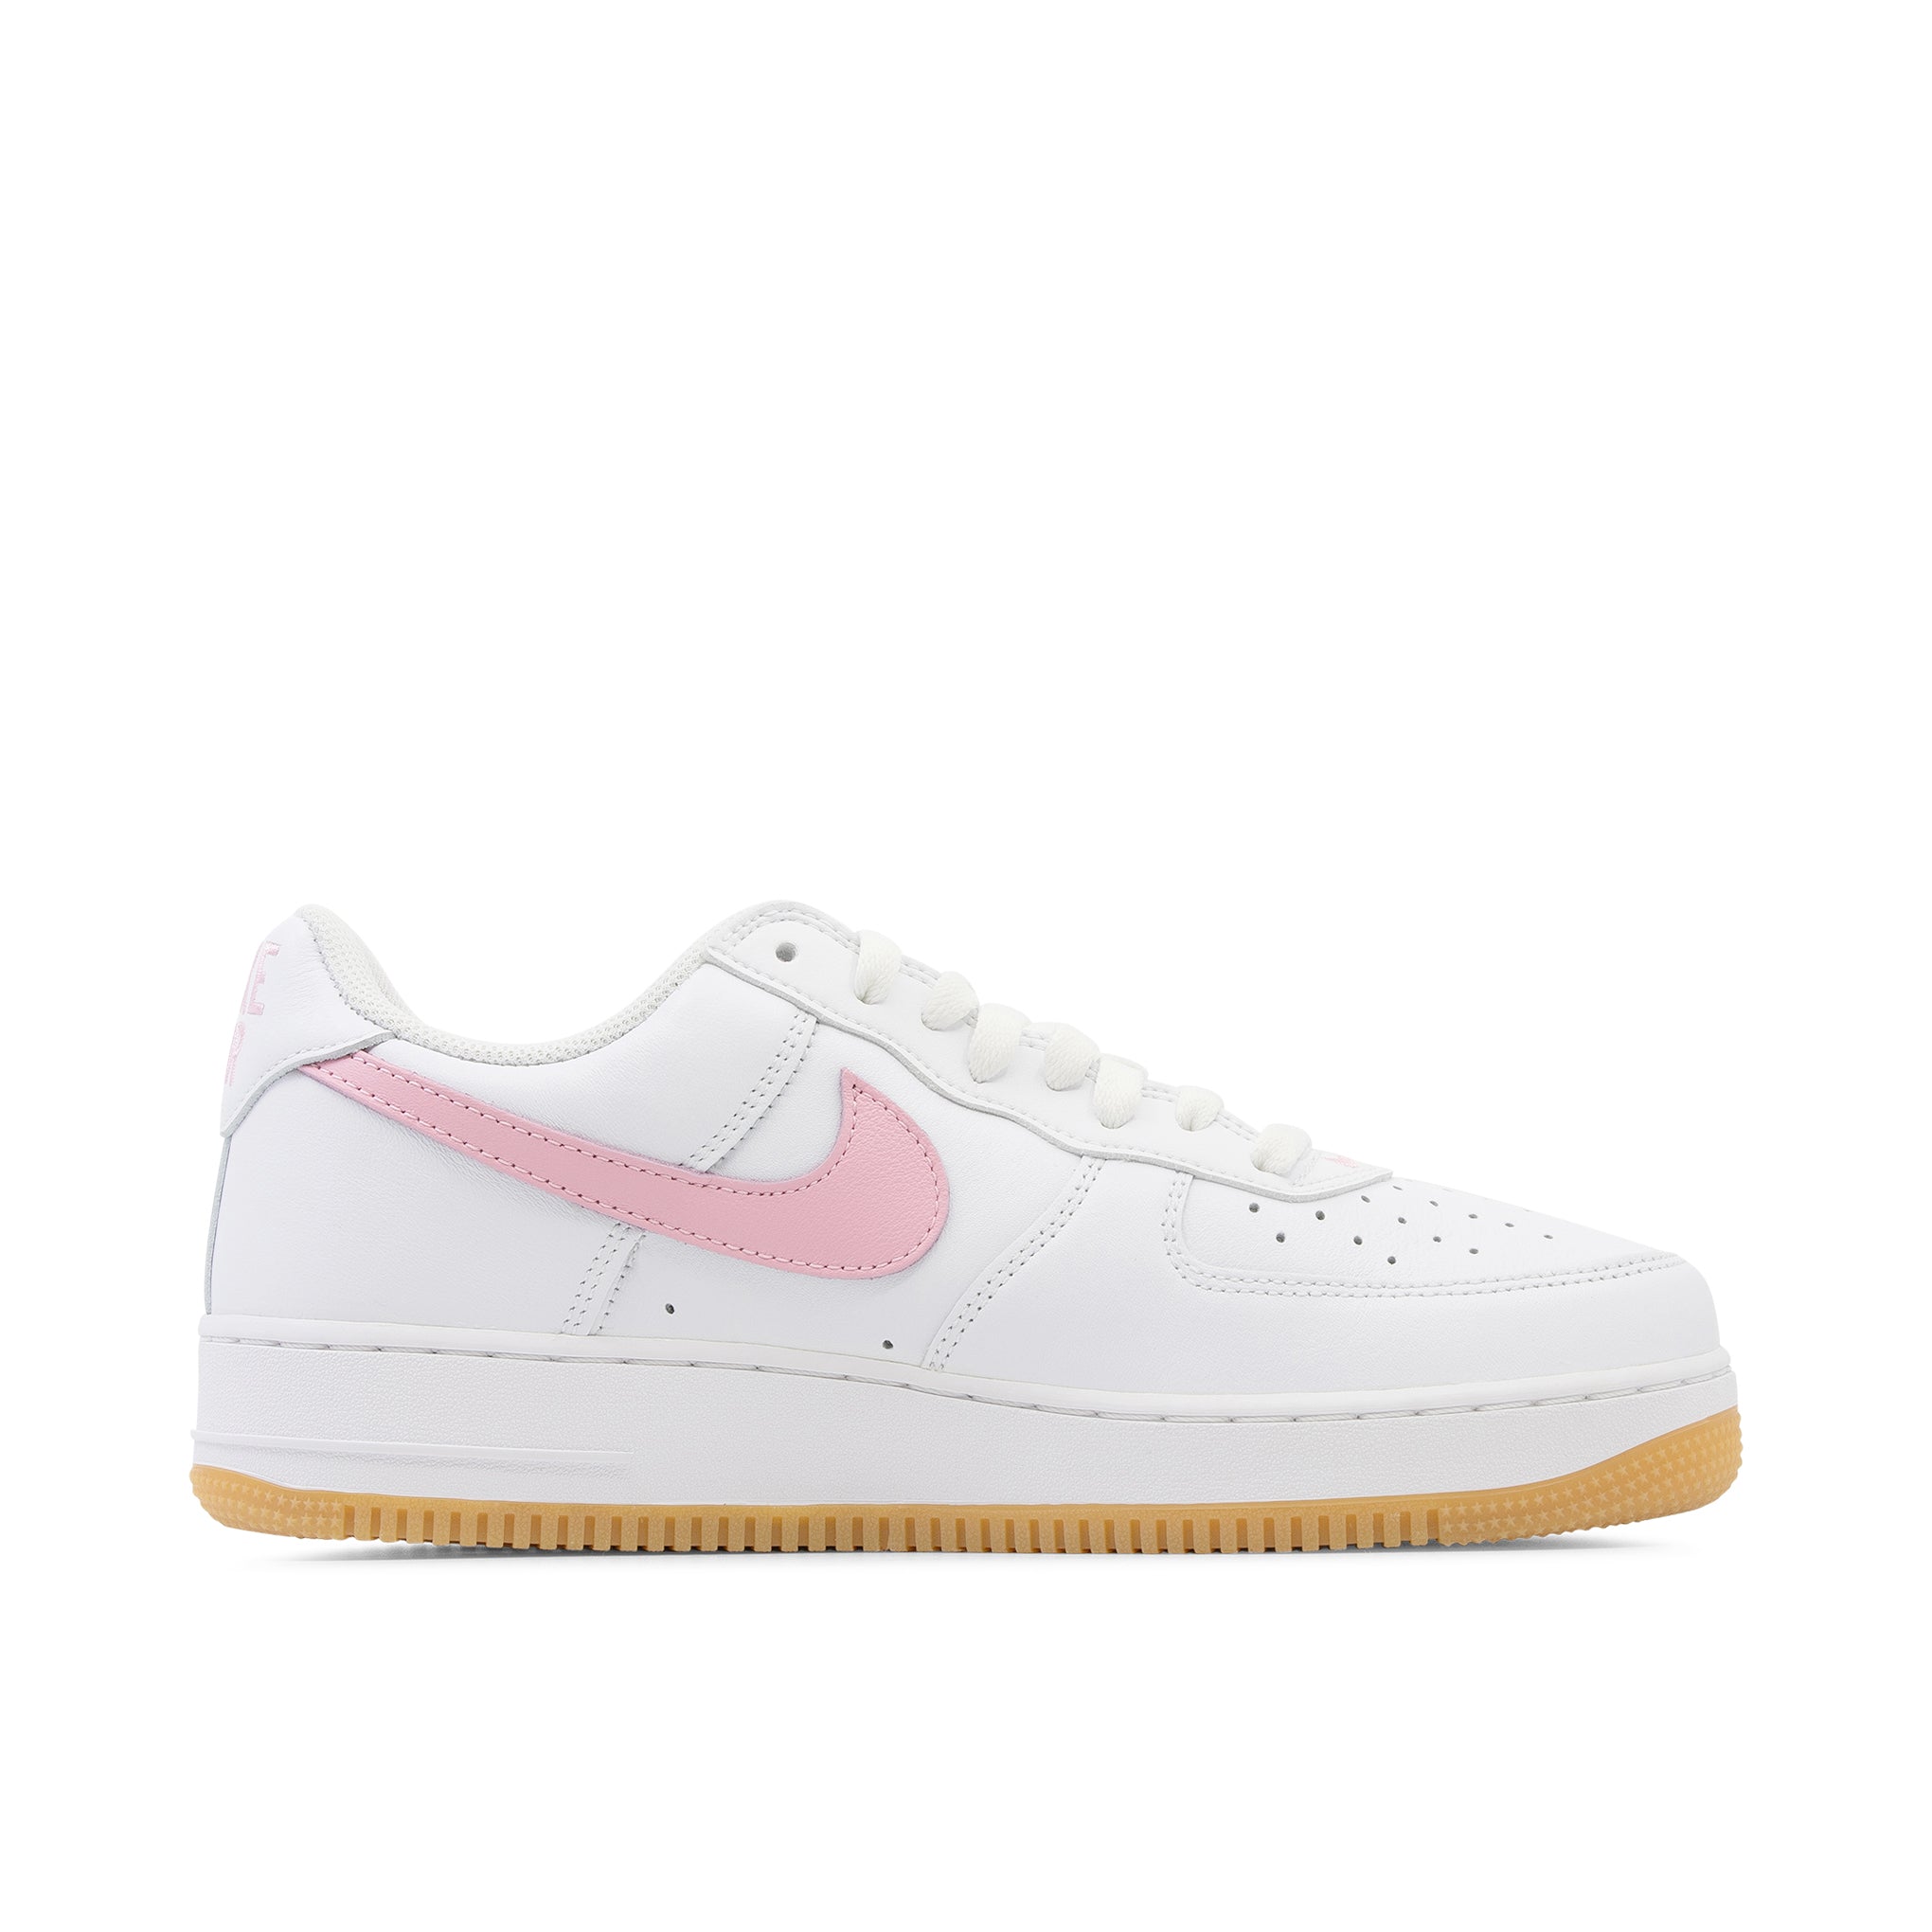 NIKE AIR FORCE 1 LOW COLOUR OF THE MONTH PINK GUM